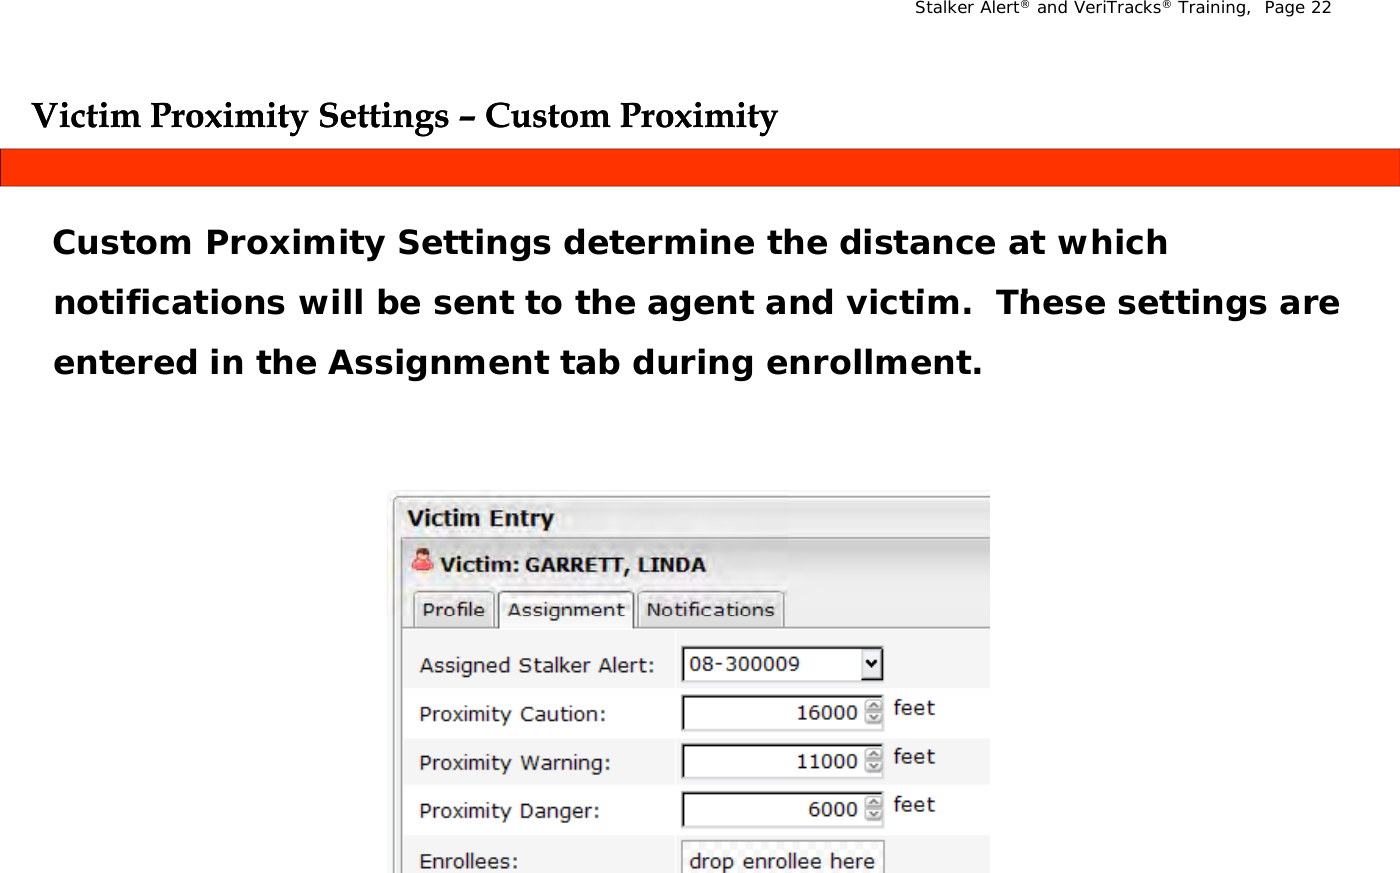 Stalker Alert®and VeriTracks®Training,  Page 22Victim Proximity Settings Victim Proximity Settings –– Custom ProximityCustom ProximityygygyyCustom Proximity Settings determine the distance at which tifi ti  ill b   t t  th   t  d i ti   Th   tti    notifications will be sent to the agent and victim.  These settings are entered in the Assignment tab during enrollment.